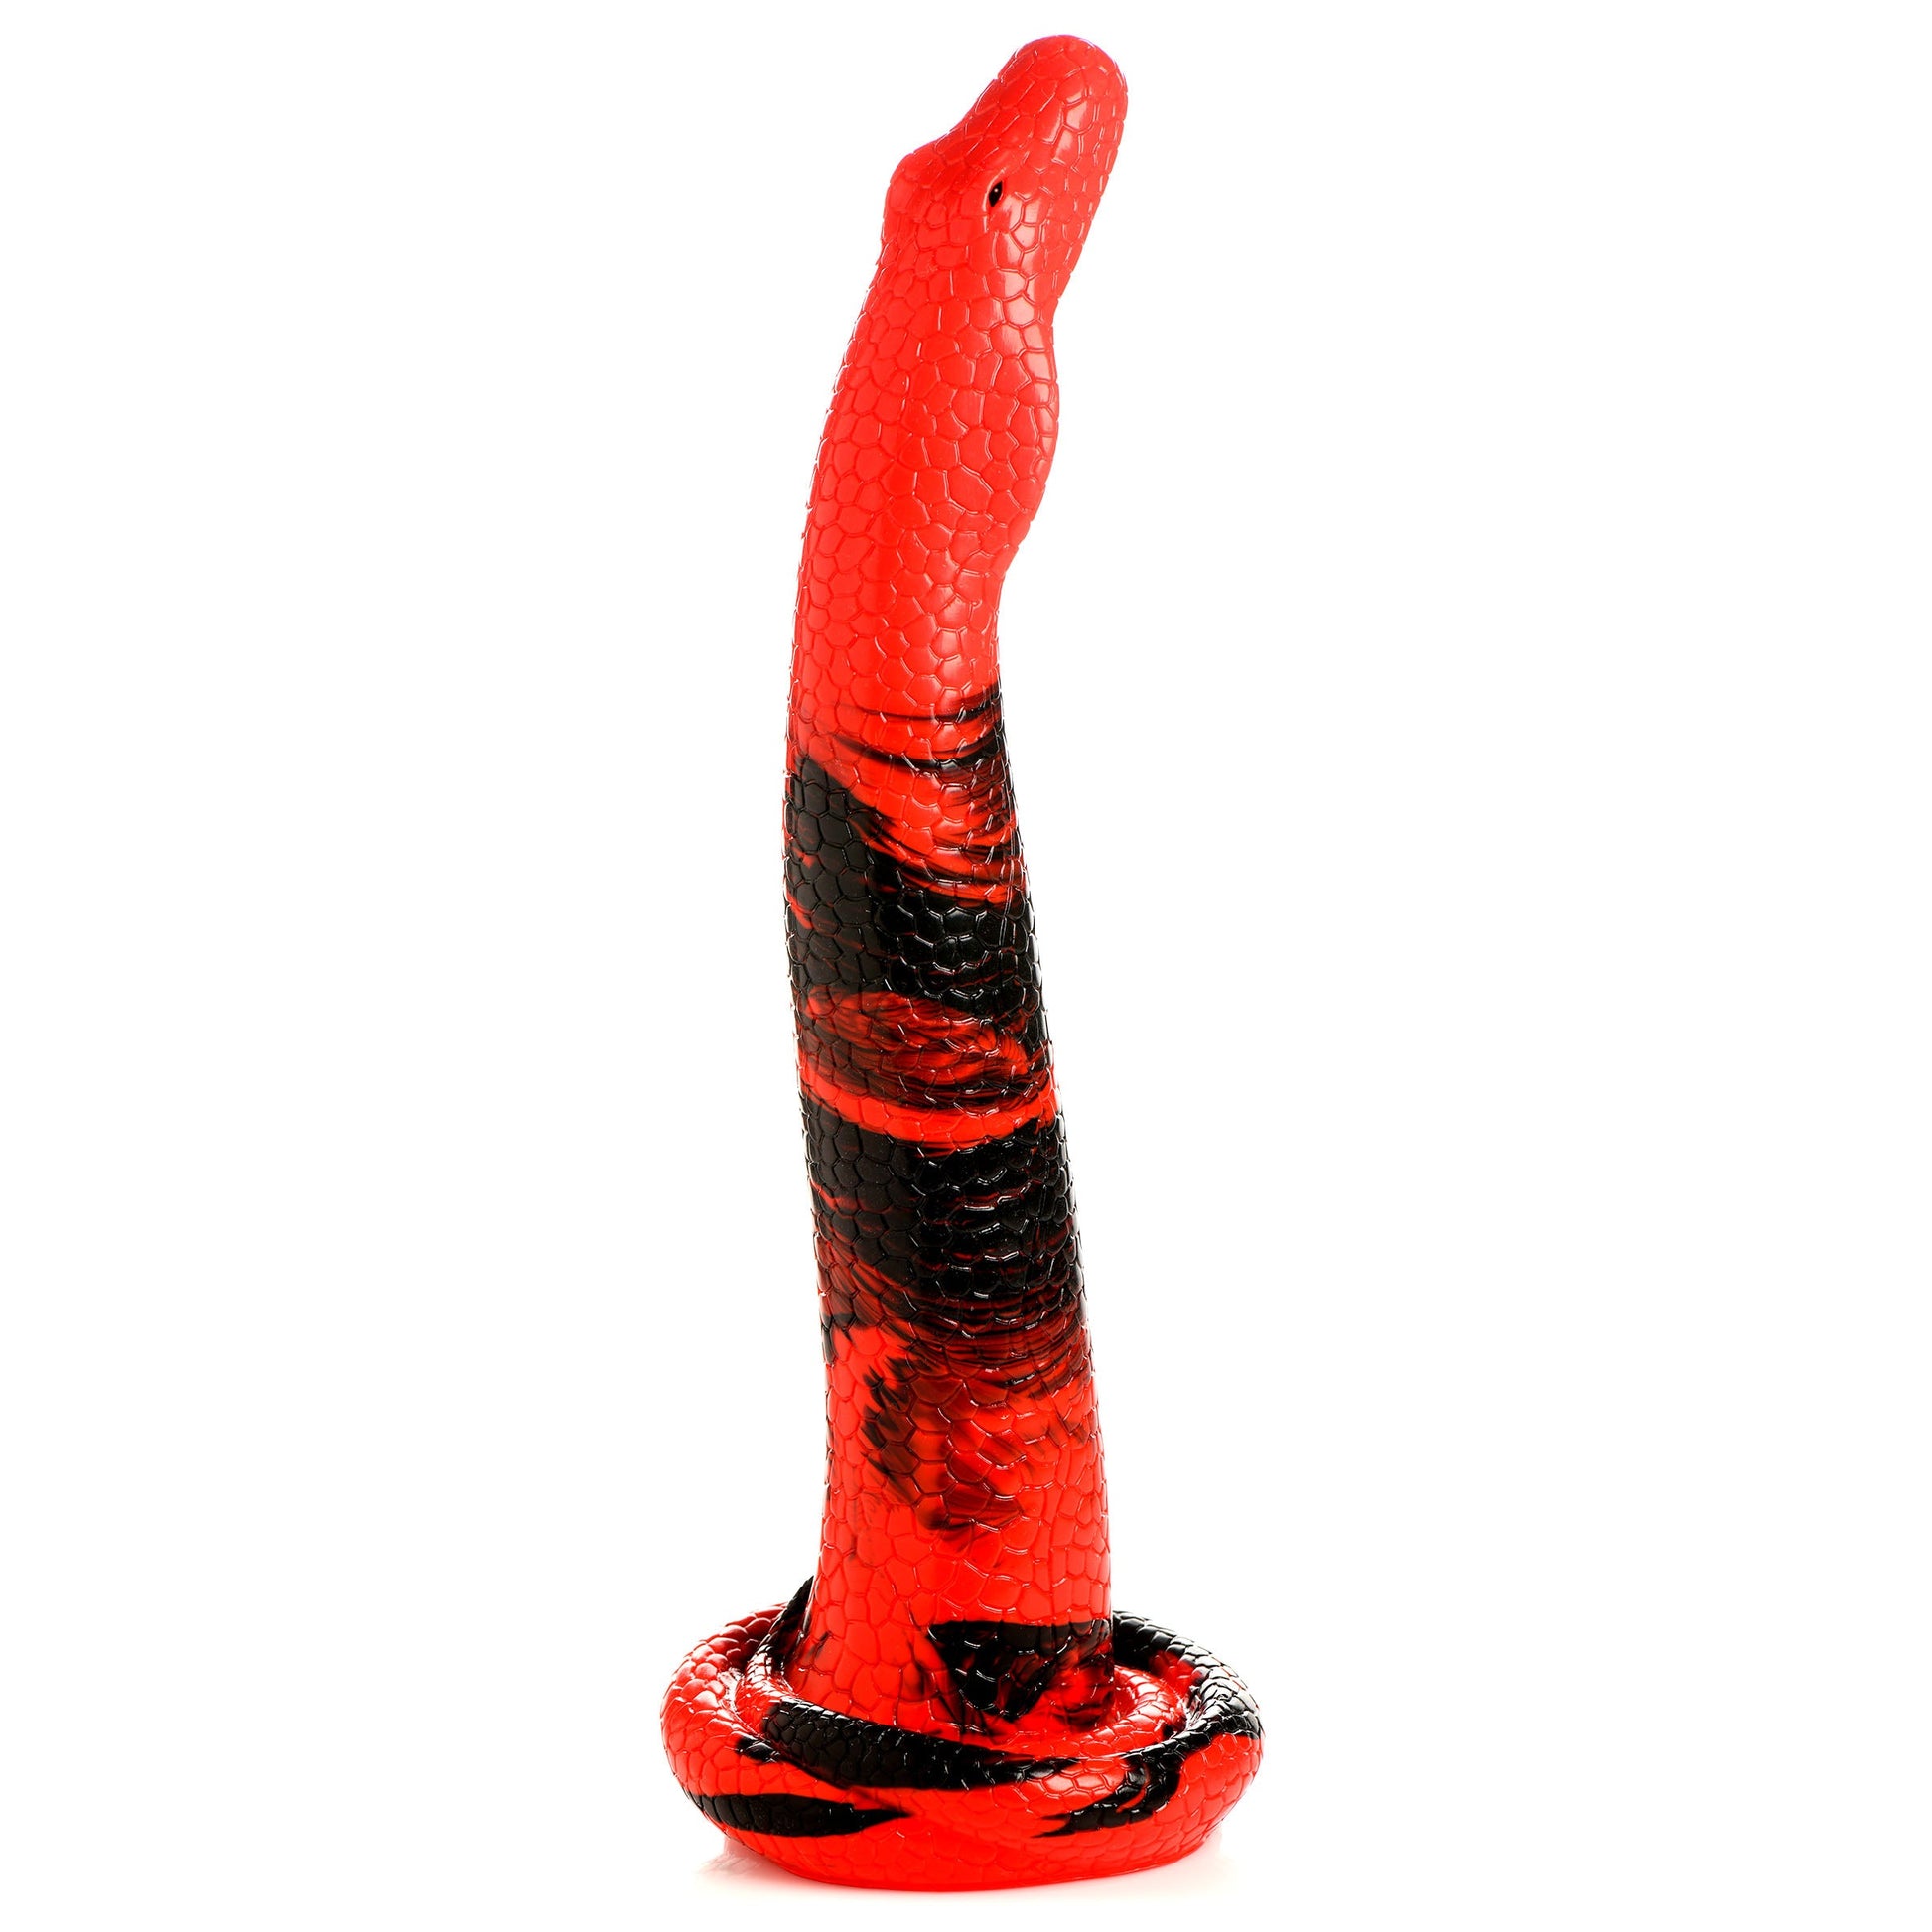 King Cobra Large 14" Long Silicone Creature Dildo - Thorn & Feather